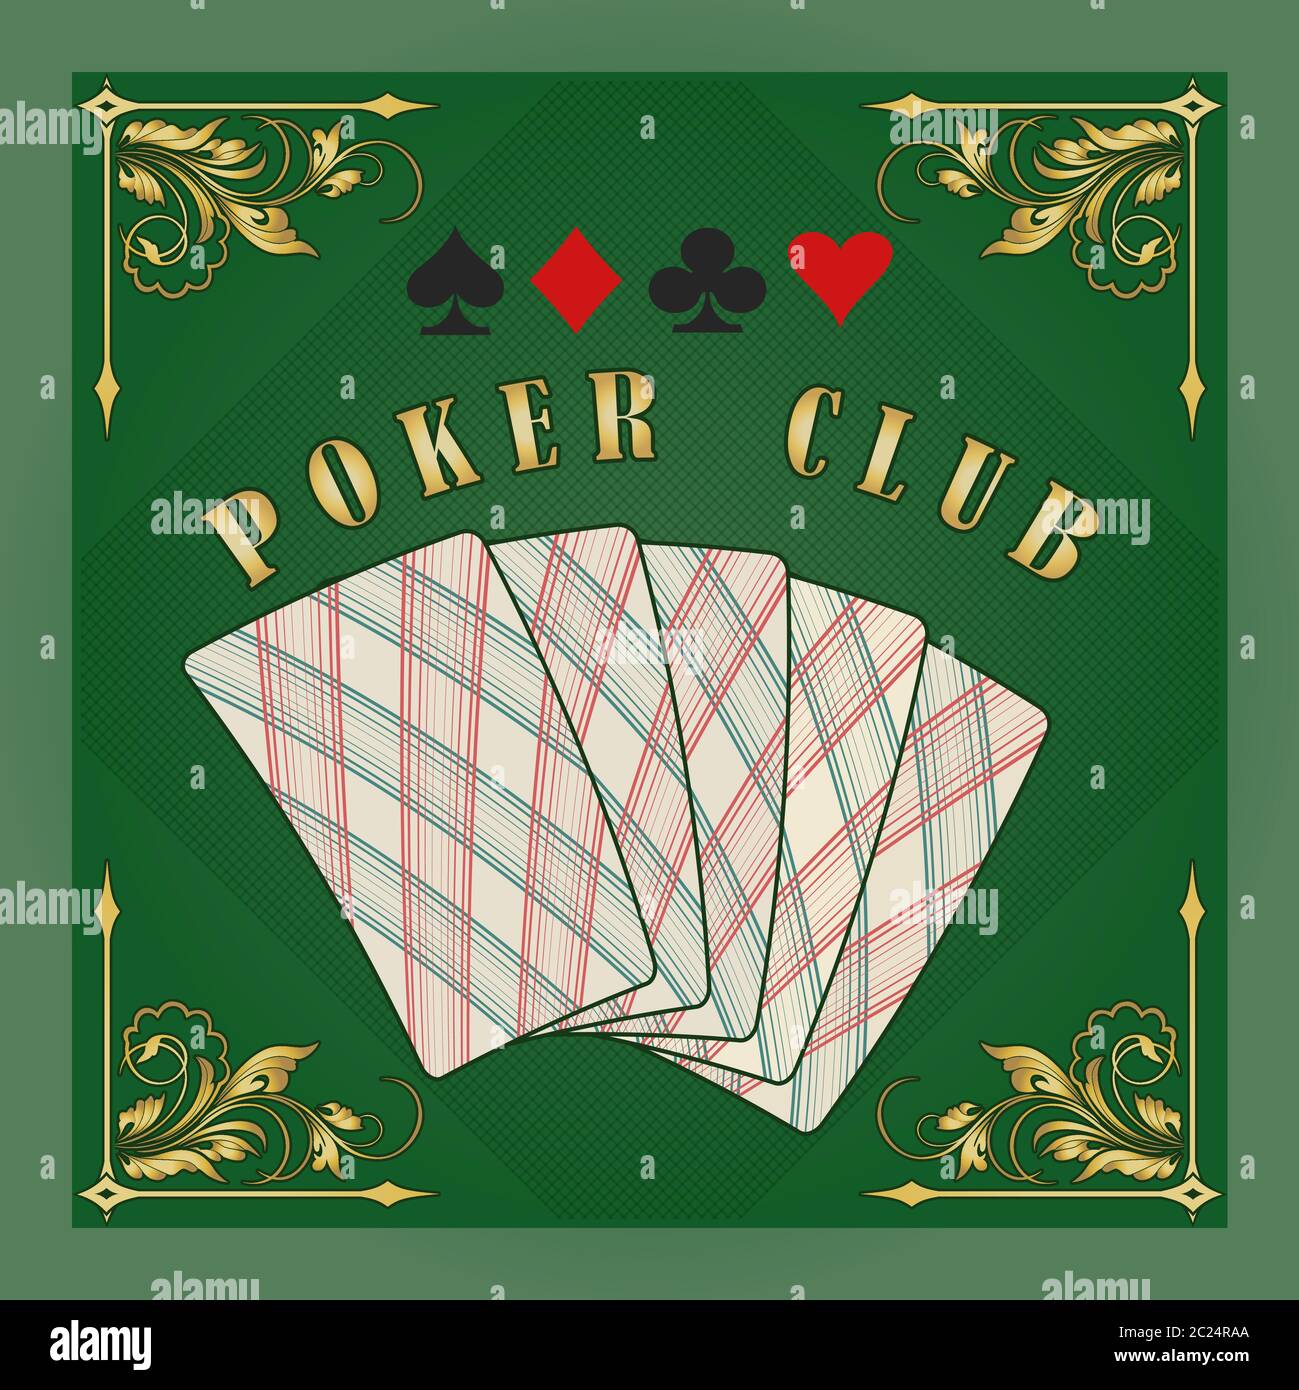 Poker club emblem in retr style. Plaing cards in green background. vector illustration. Stock Vector